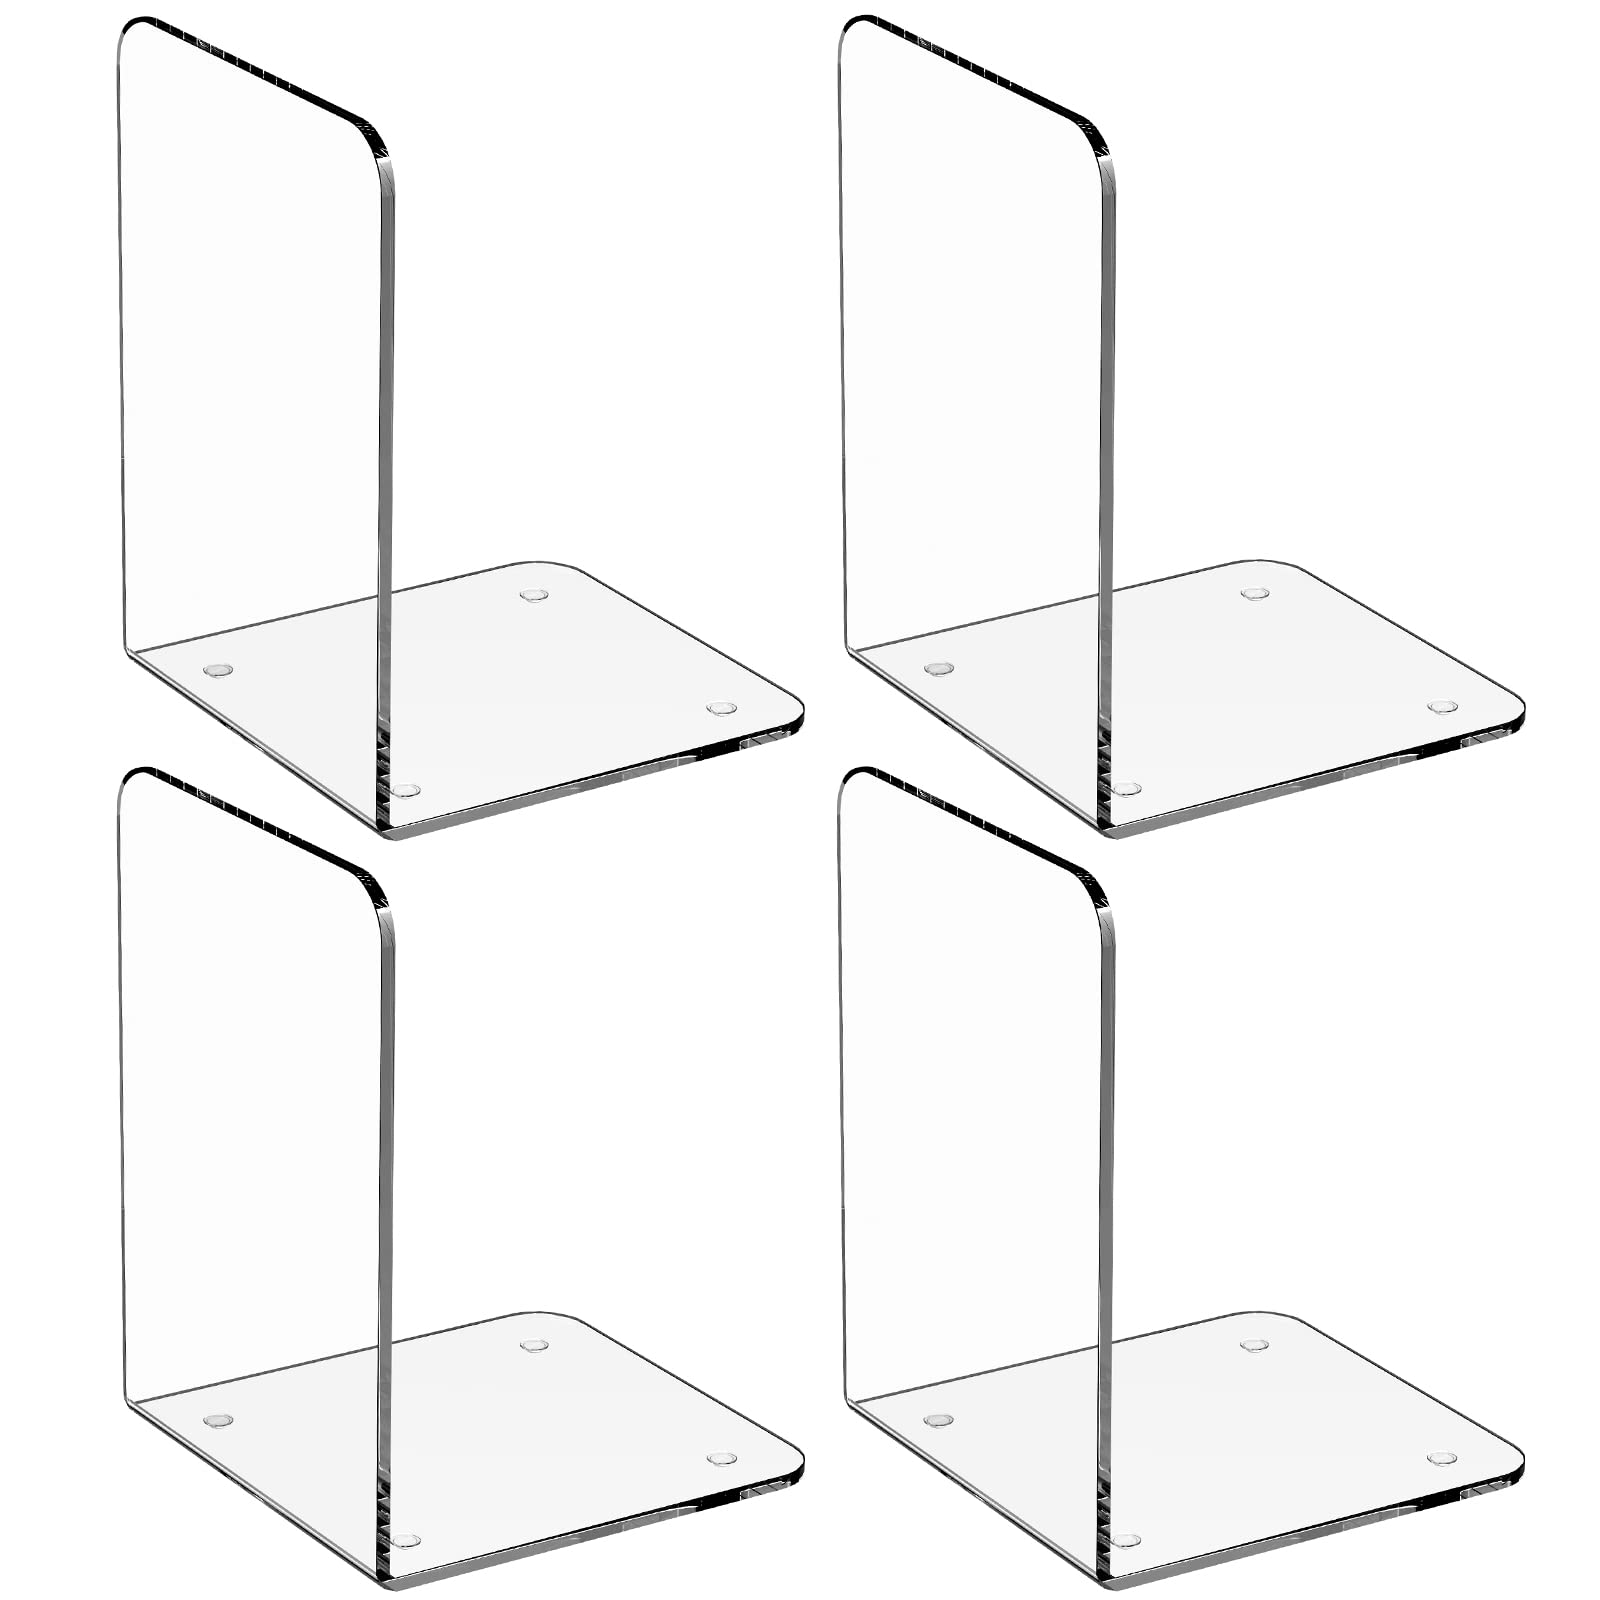 Clear Acrylic Non-Skid Bookends Shelves Book Holder Stopper for Books